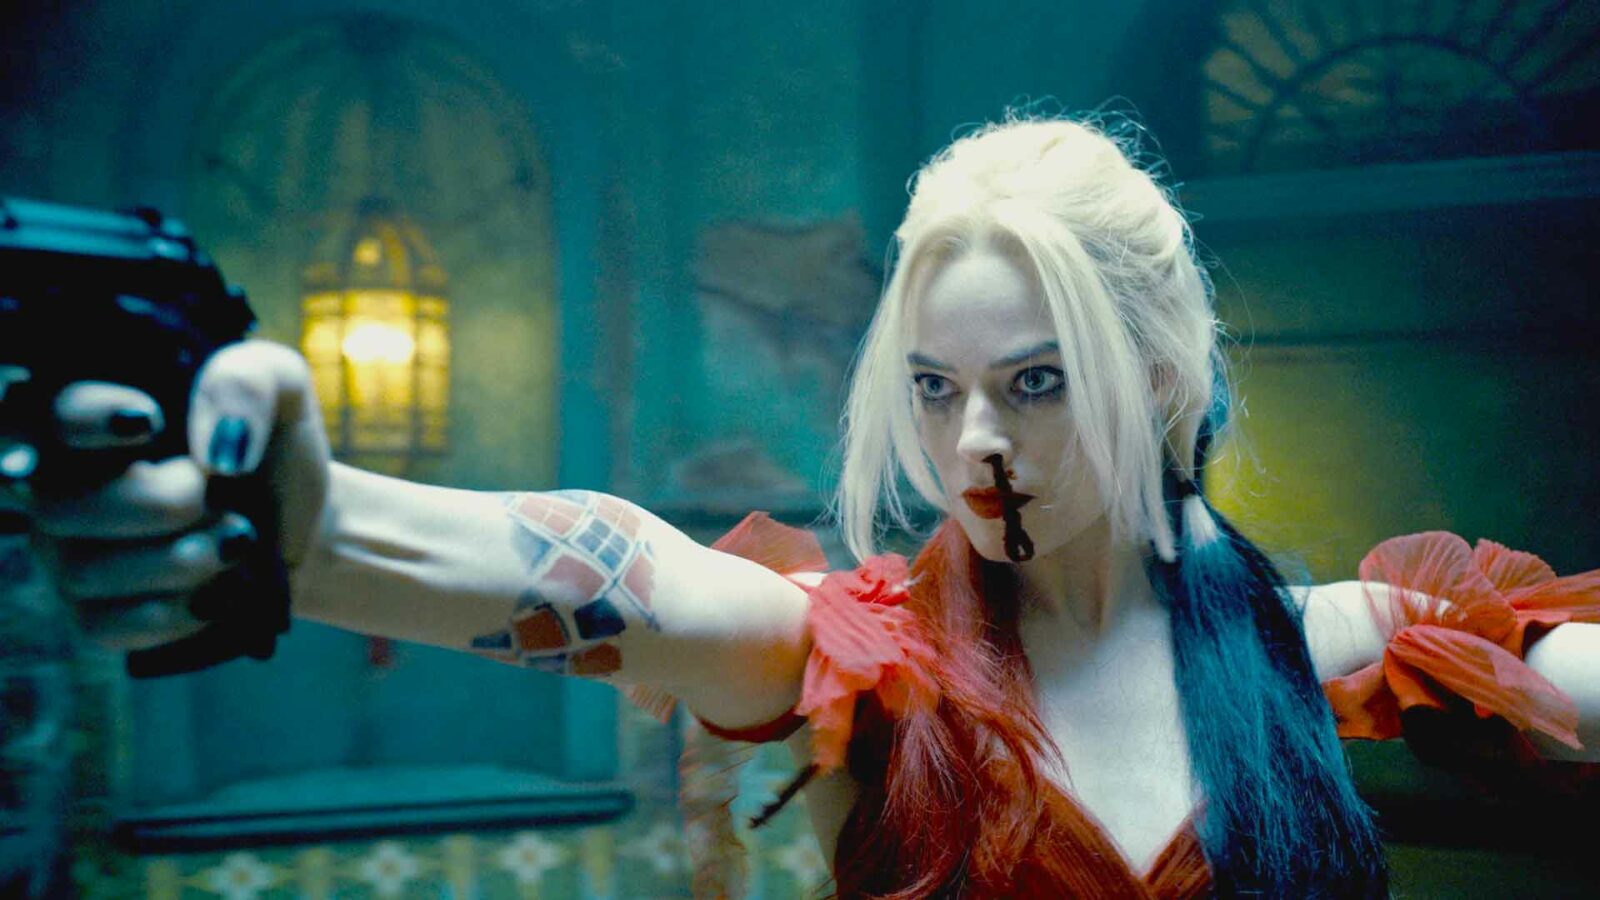 THE SUICIDE SQUAD IS CRAZY FUN AND THE BEST MOVIE FROM THE DCEU IN YEARS